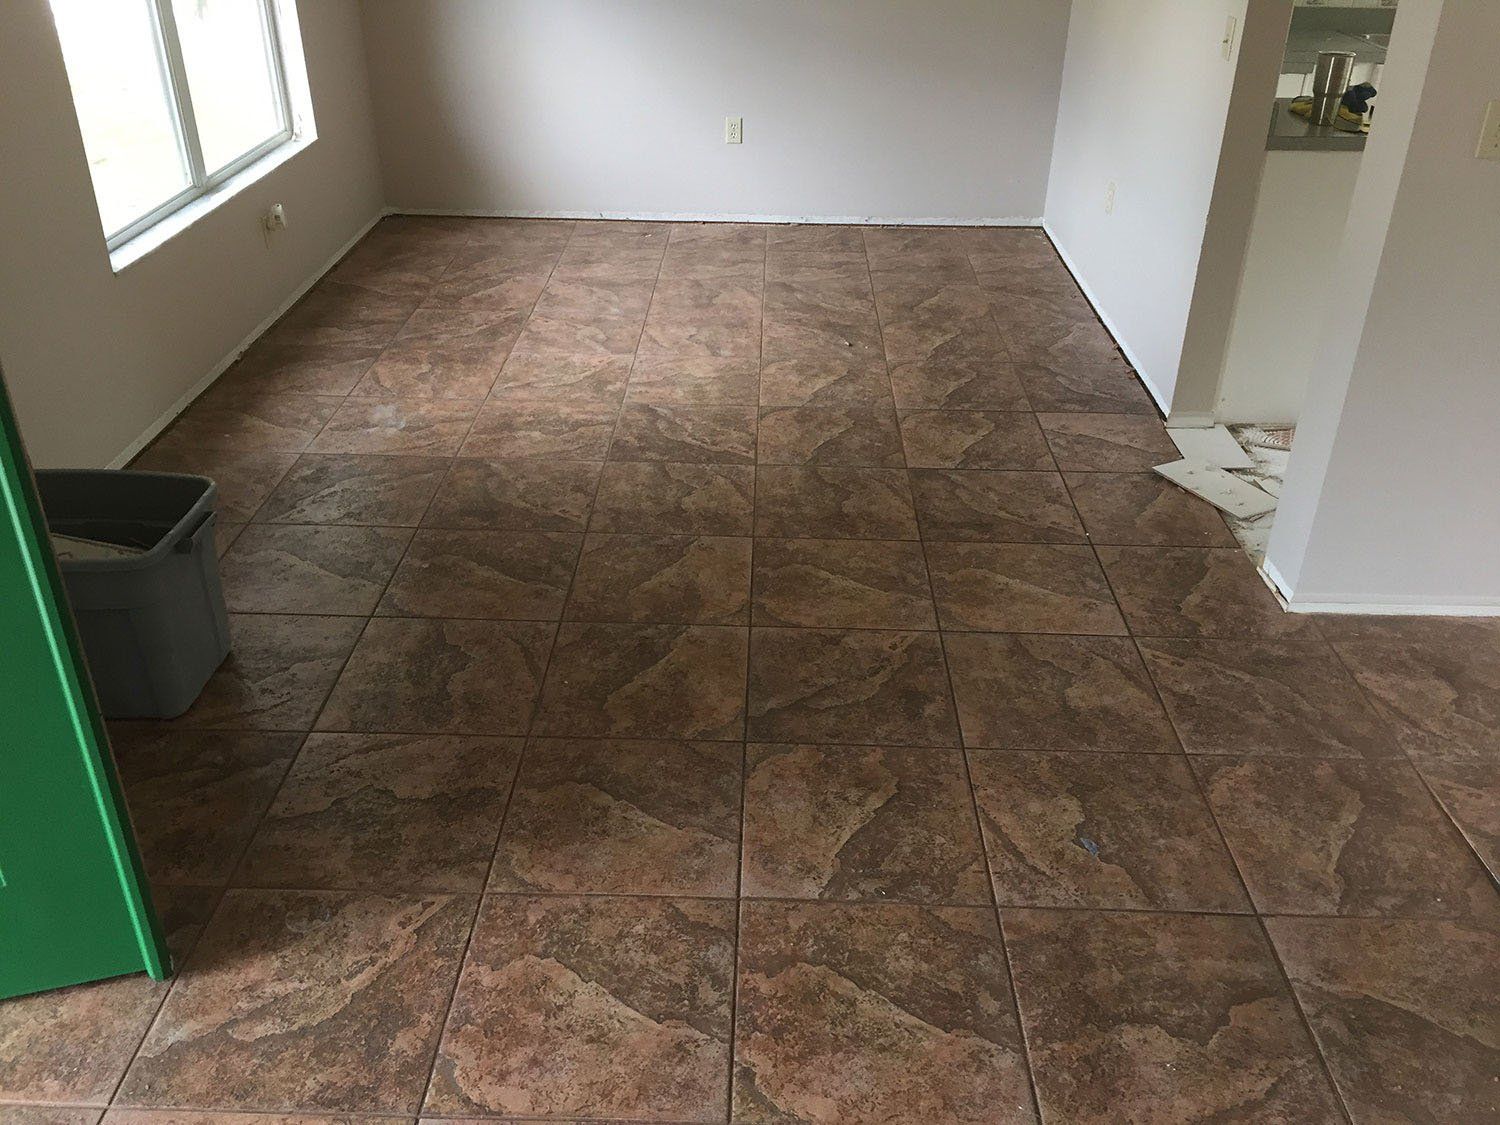 Before Tiles Removal